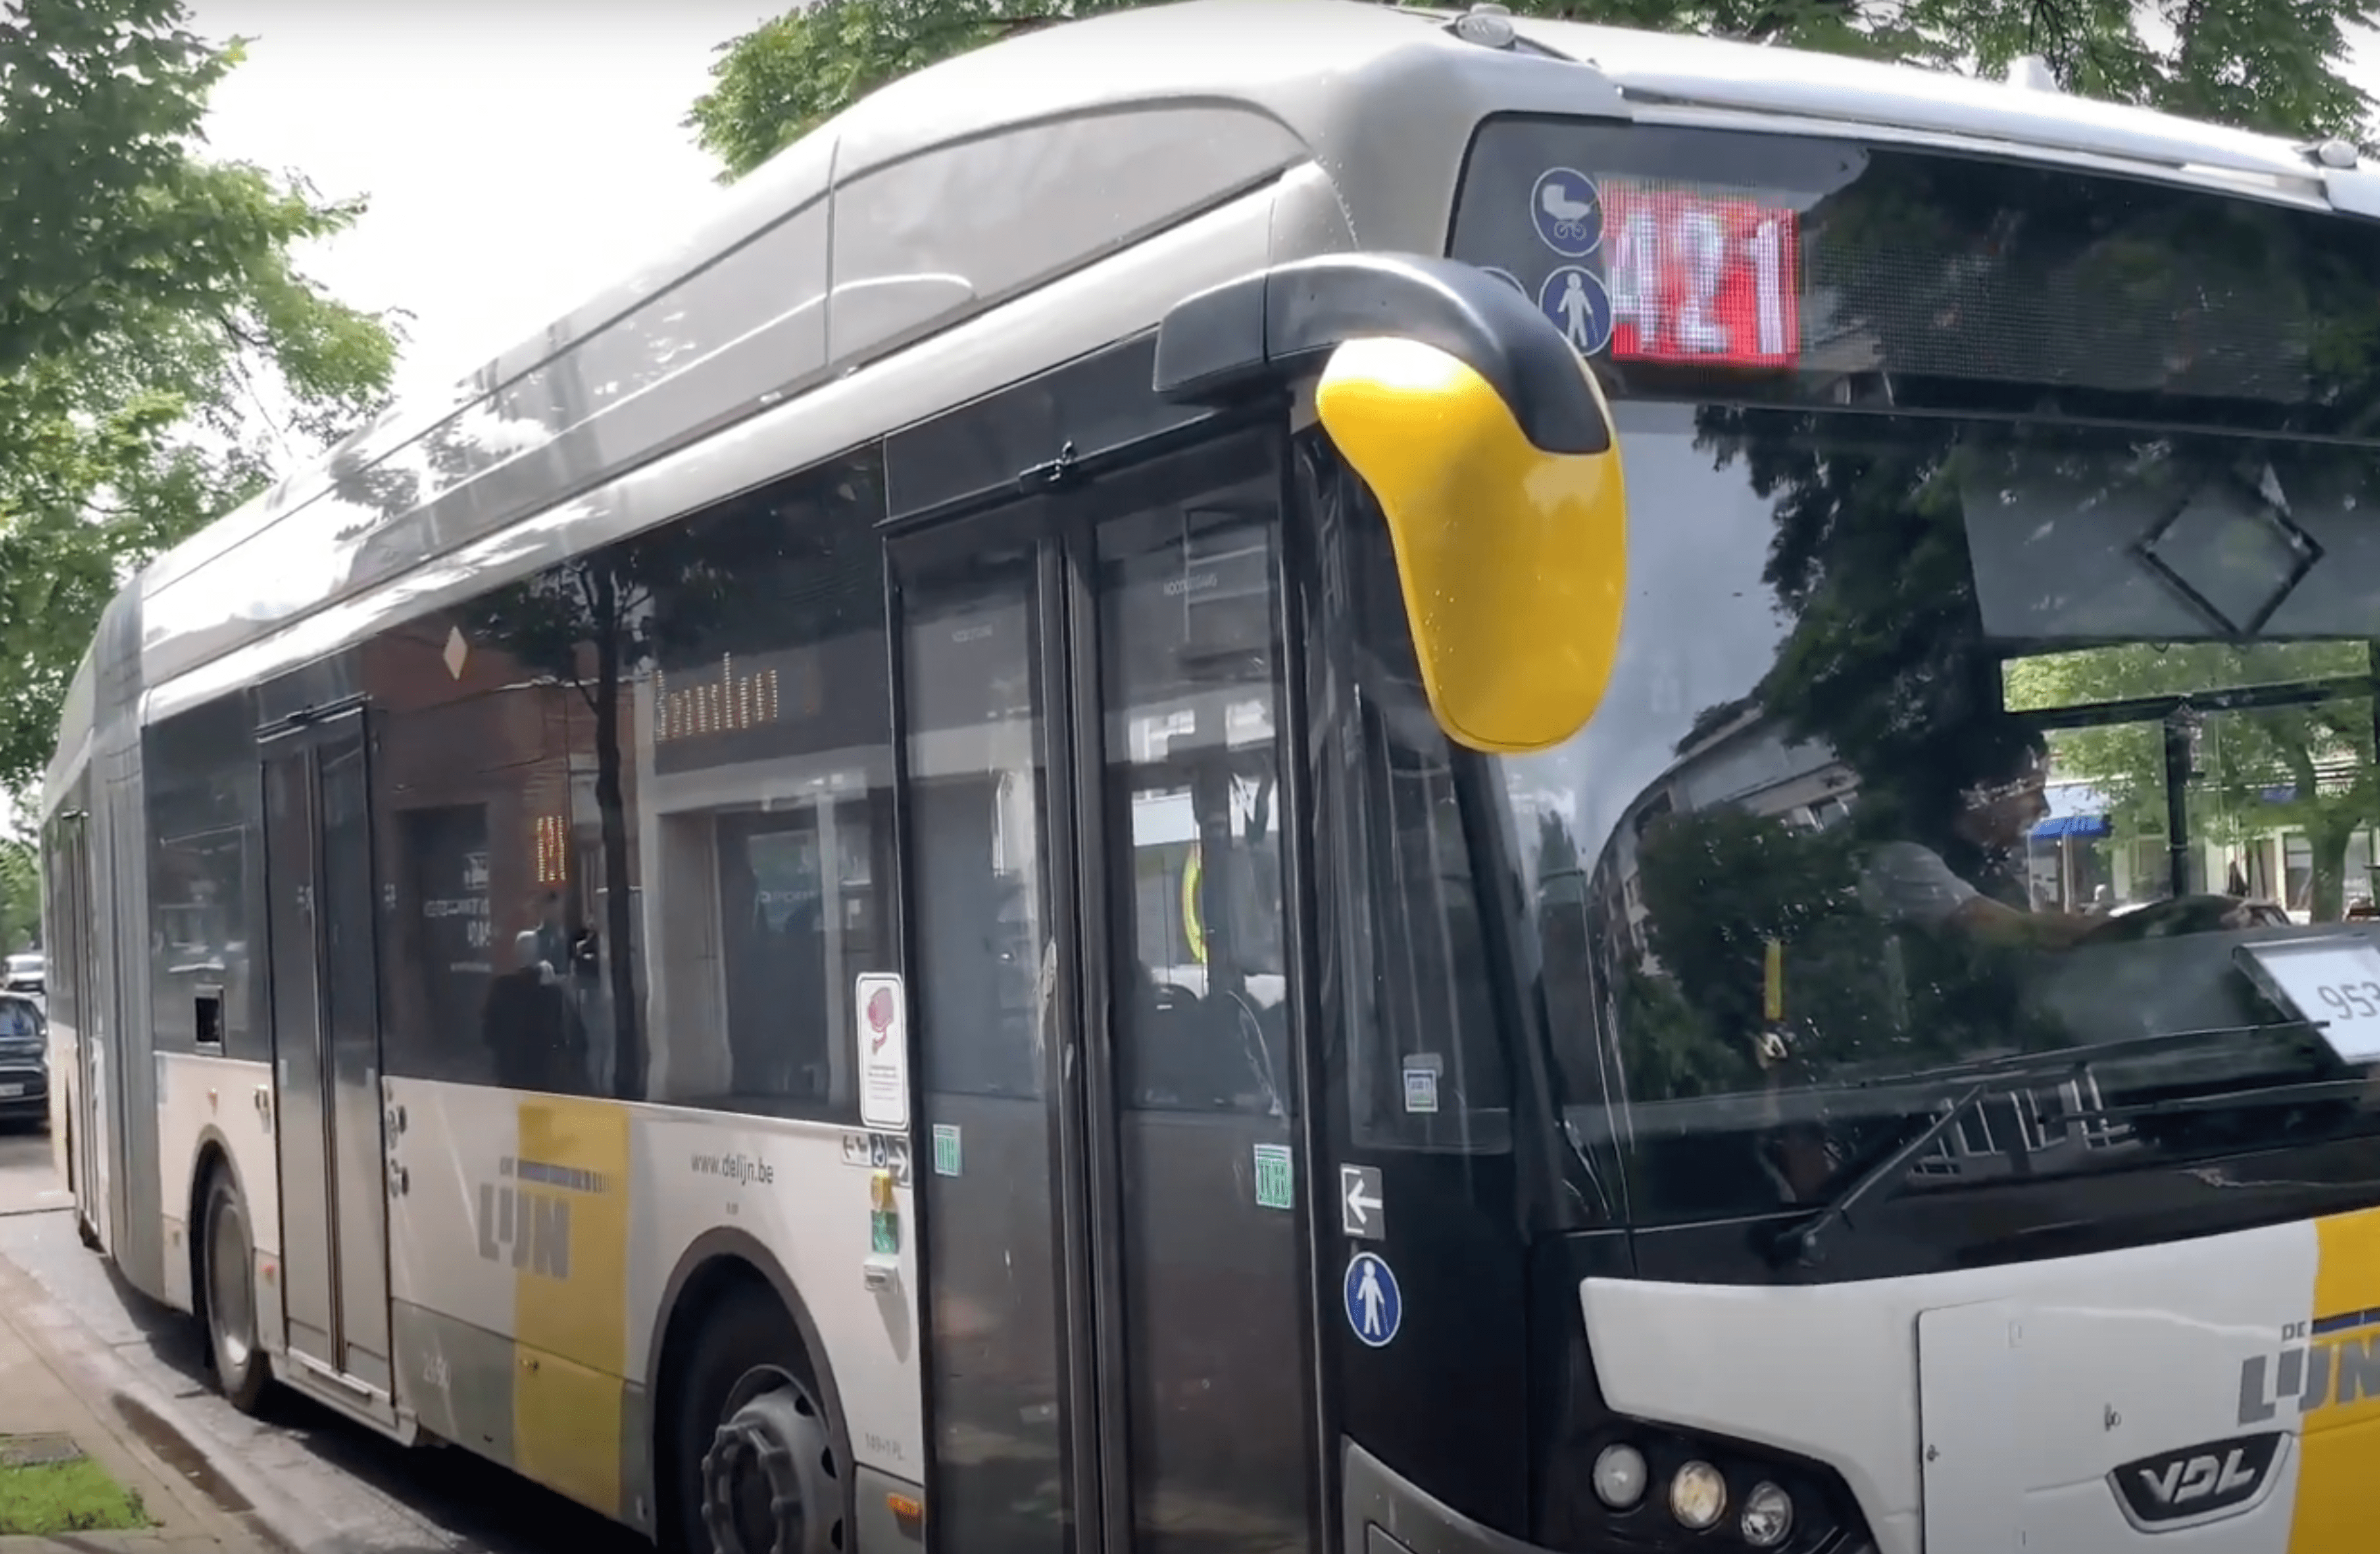 Transport company De Lijn chooses BYD prize that wins over quality